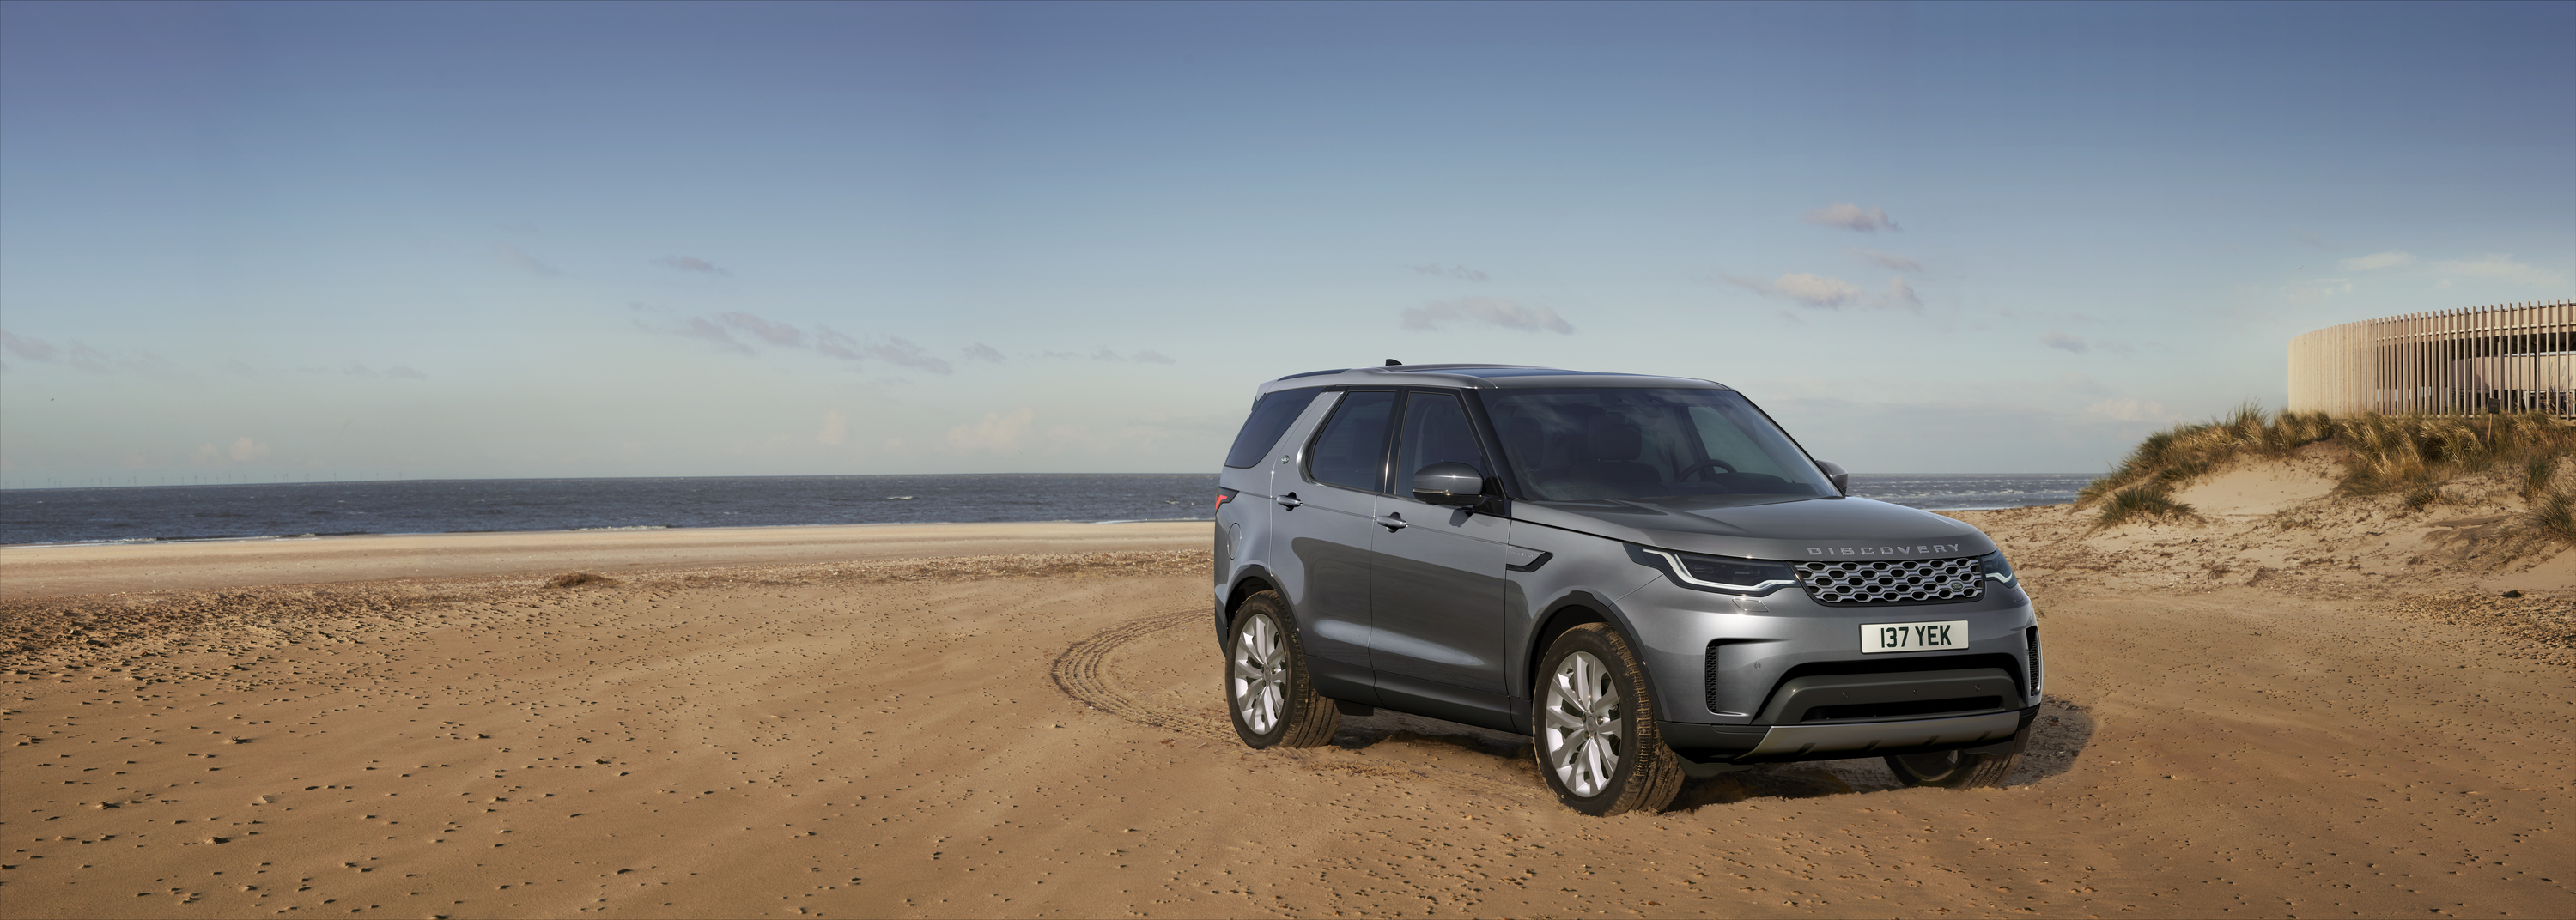 2021 Land Rover Discovery Loads Up On Comfort and Connectivity